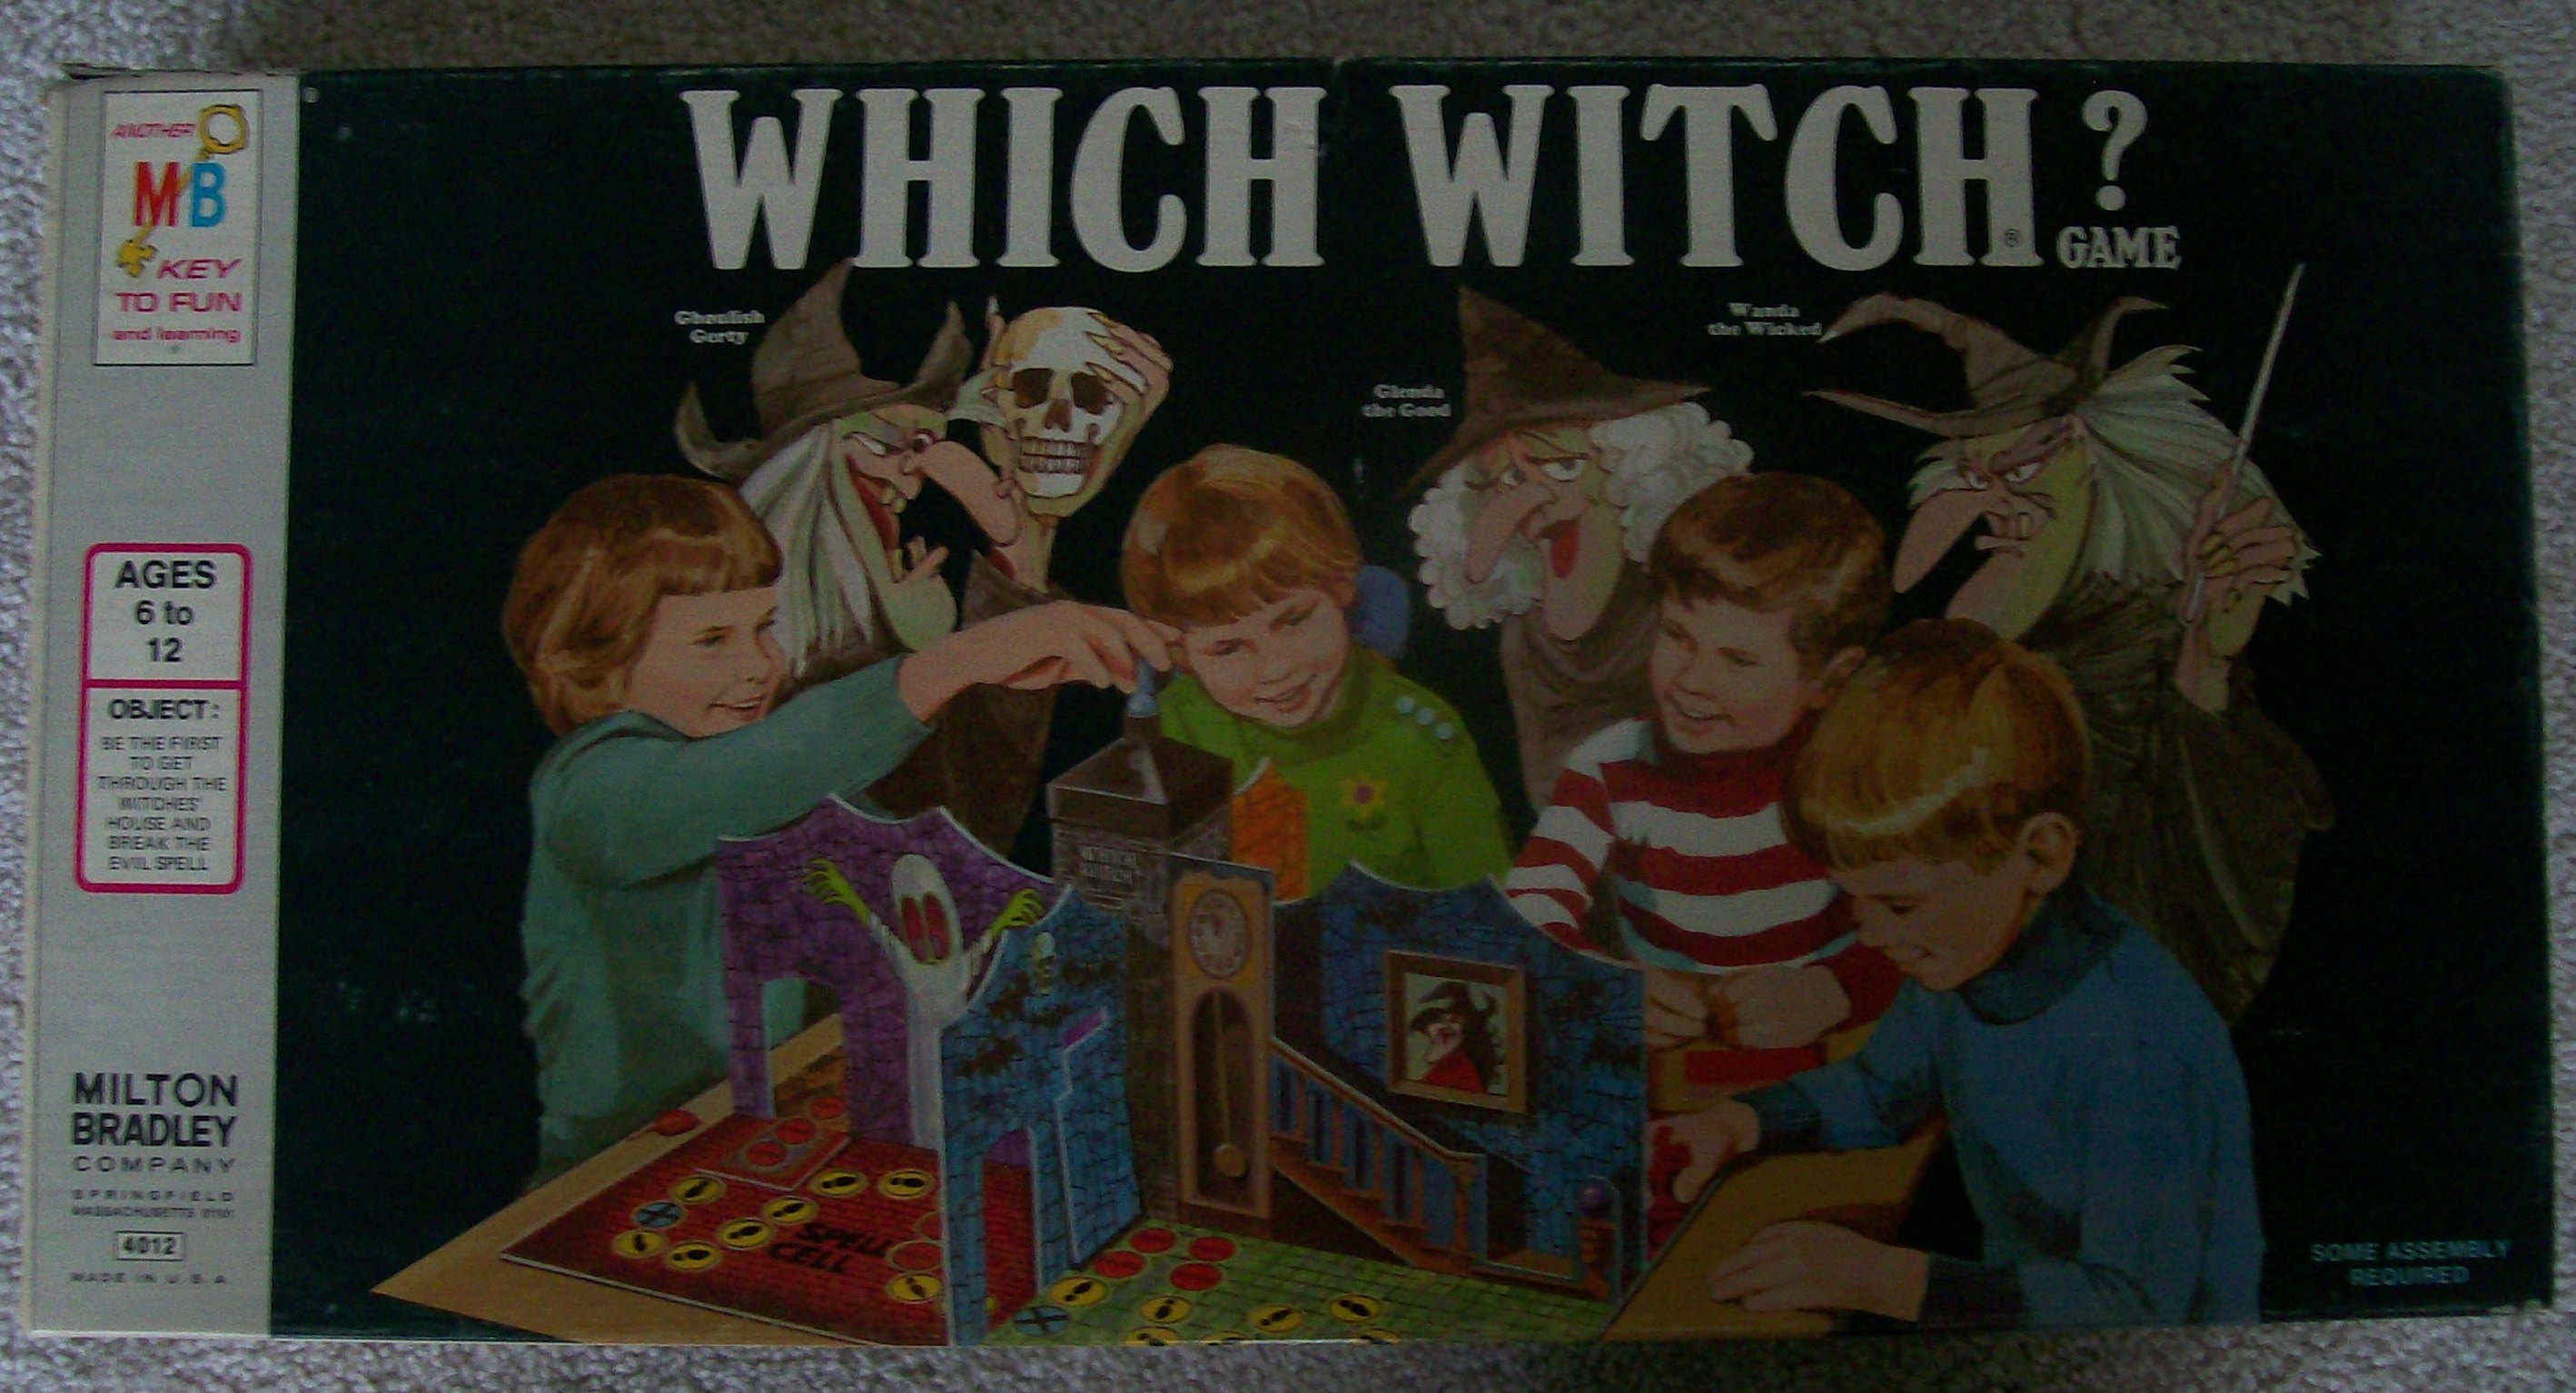 Vintage 1970 Which Witch? Board Game, Milton Bradley